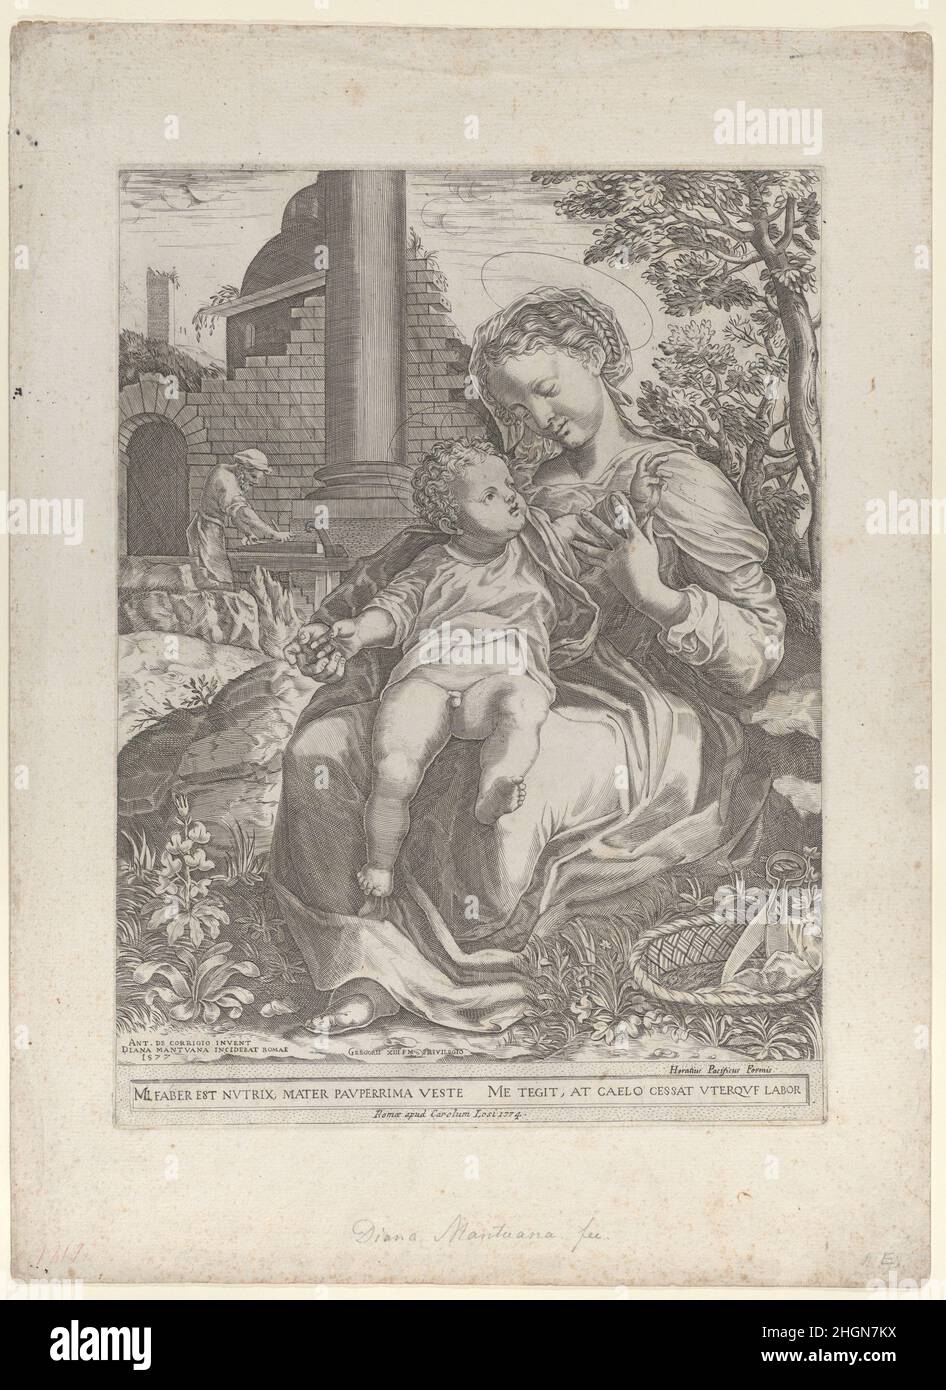 The Holy Family in Egypt, with Joseph as a carpenter in the background at left [1577], republished 1774 Diana Scultori. The Holy Family in Egypt, with Joseph as a carpenter in the background at left. Diana Scultori (Italian, Mantua ca. 1535?–after 1588 Rome). [1577], republished 1774. Engraving. Carlo Losi (Italian, 1757– after 1805). Prints Stock Photo